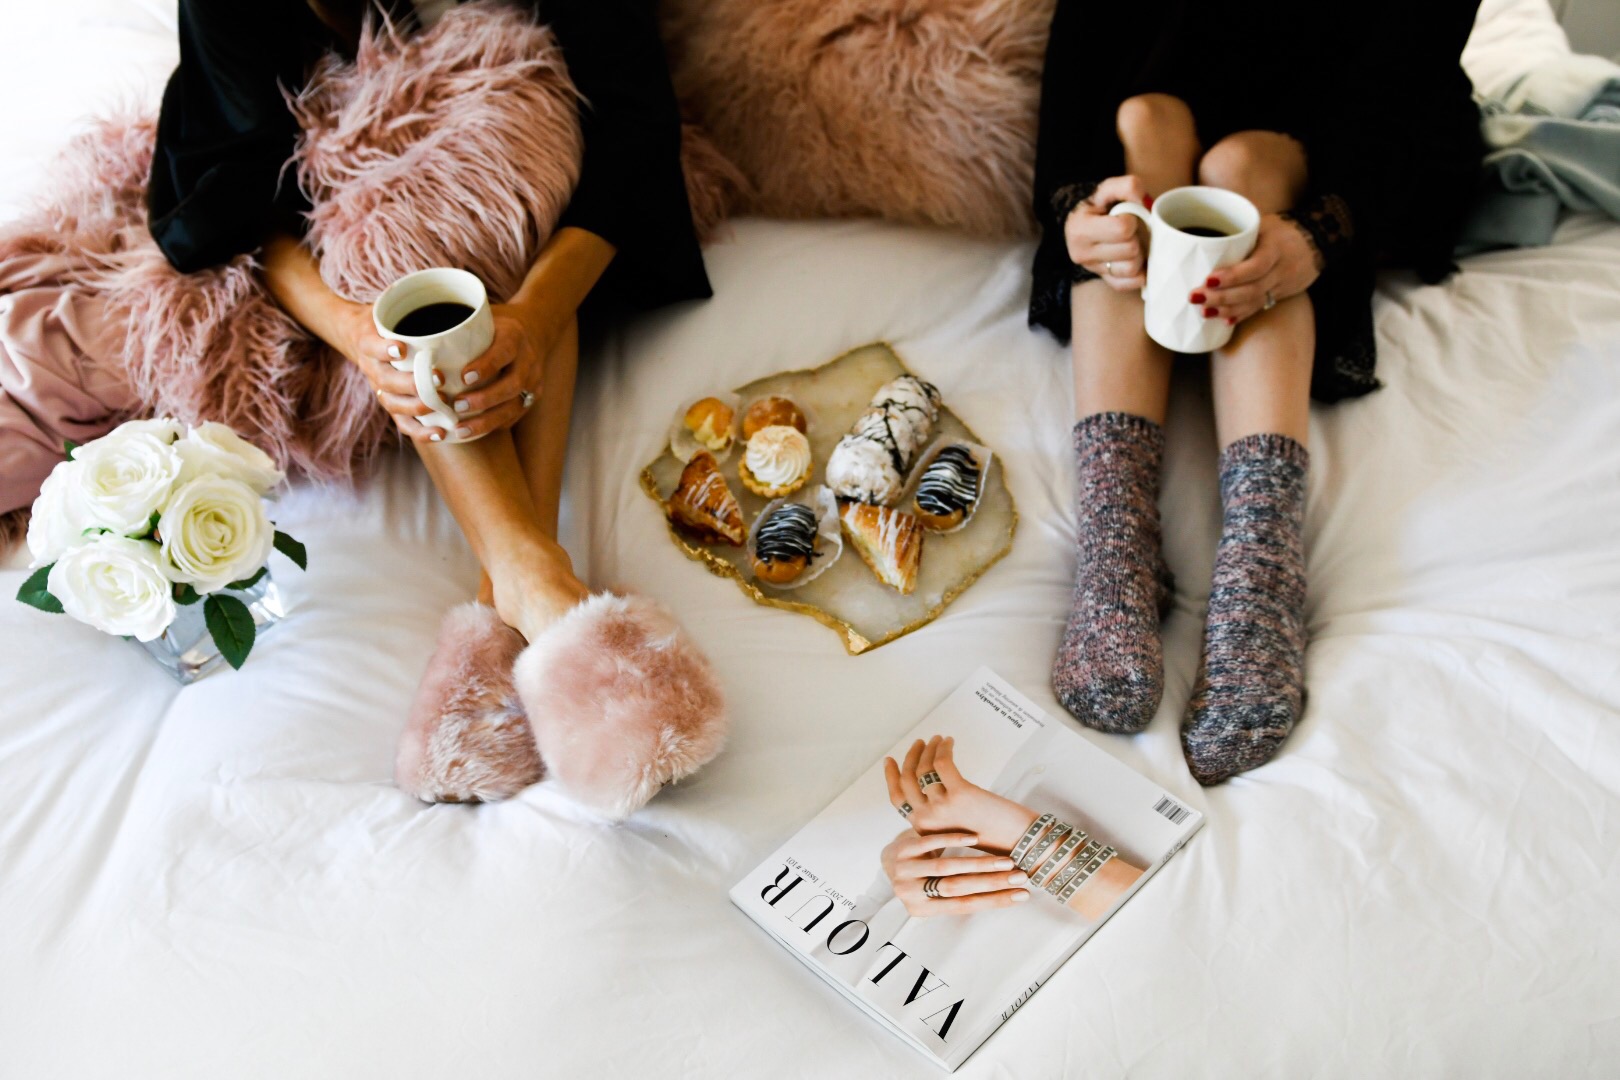 Girls' Night In With Valour Magazine Esther Santer Fashion Blog NYC Street Style Blogger Outfit OOTD Trendy Eishes Style Cozy Blanket Throw Pillows Flowers Desserts Pastries Black Robes Pink Fur Fuzzy Slippers Jcrew Adore Me Socks Mugs Coffee  Women.jpg